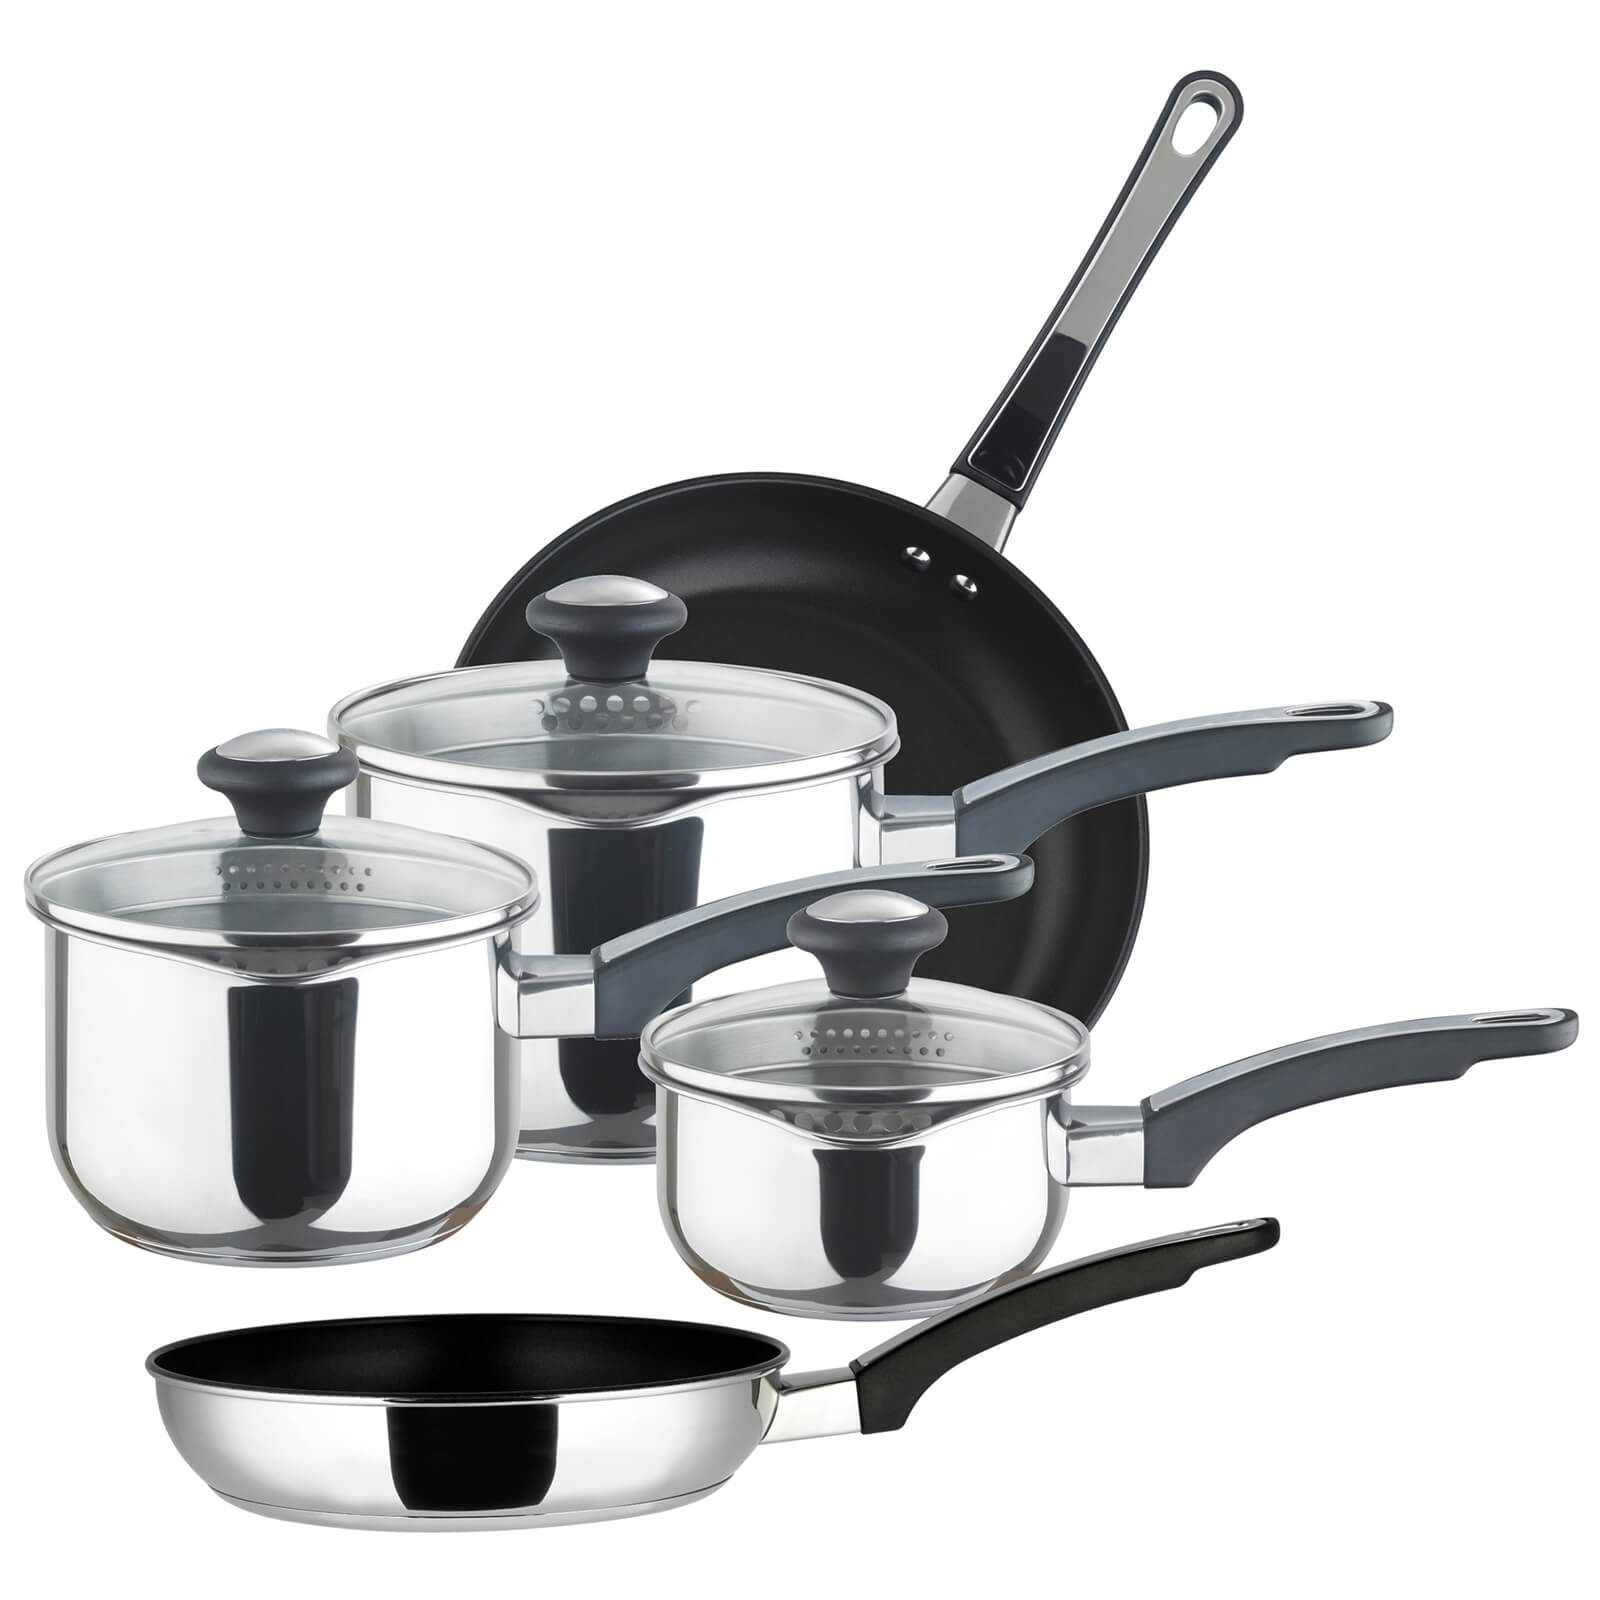 Prestige Everyday Induction Stainless Steel Straining Cookware - Set of 5